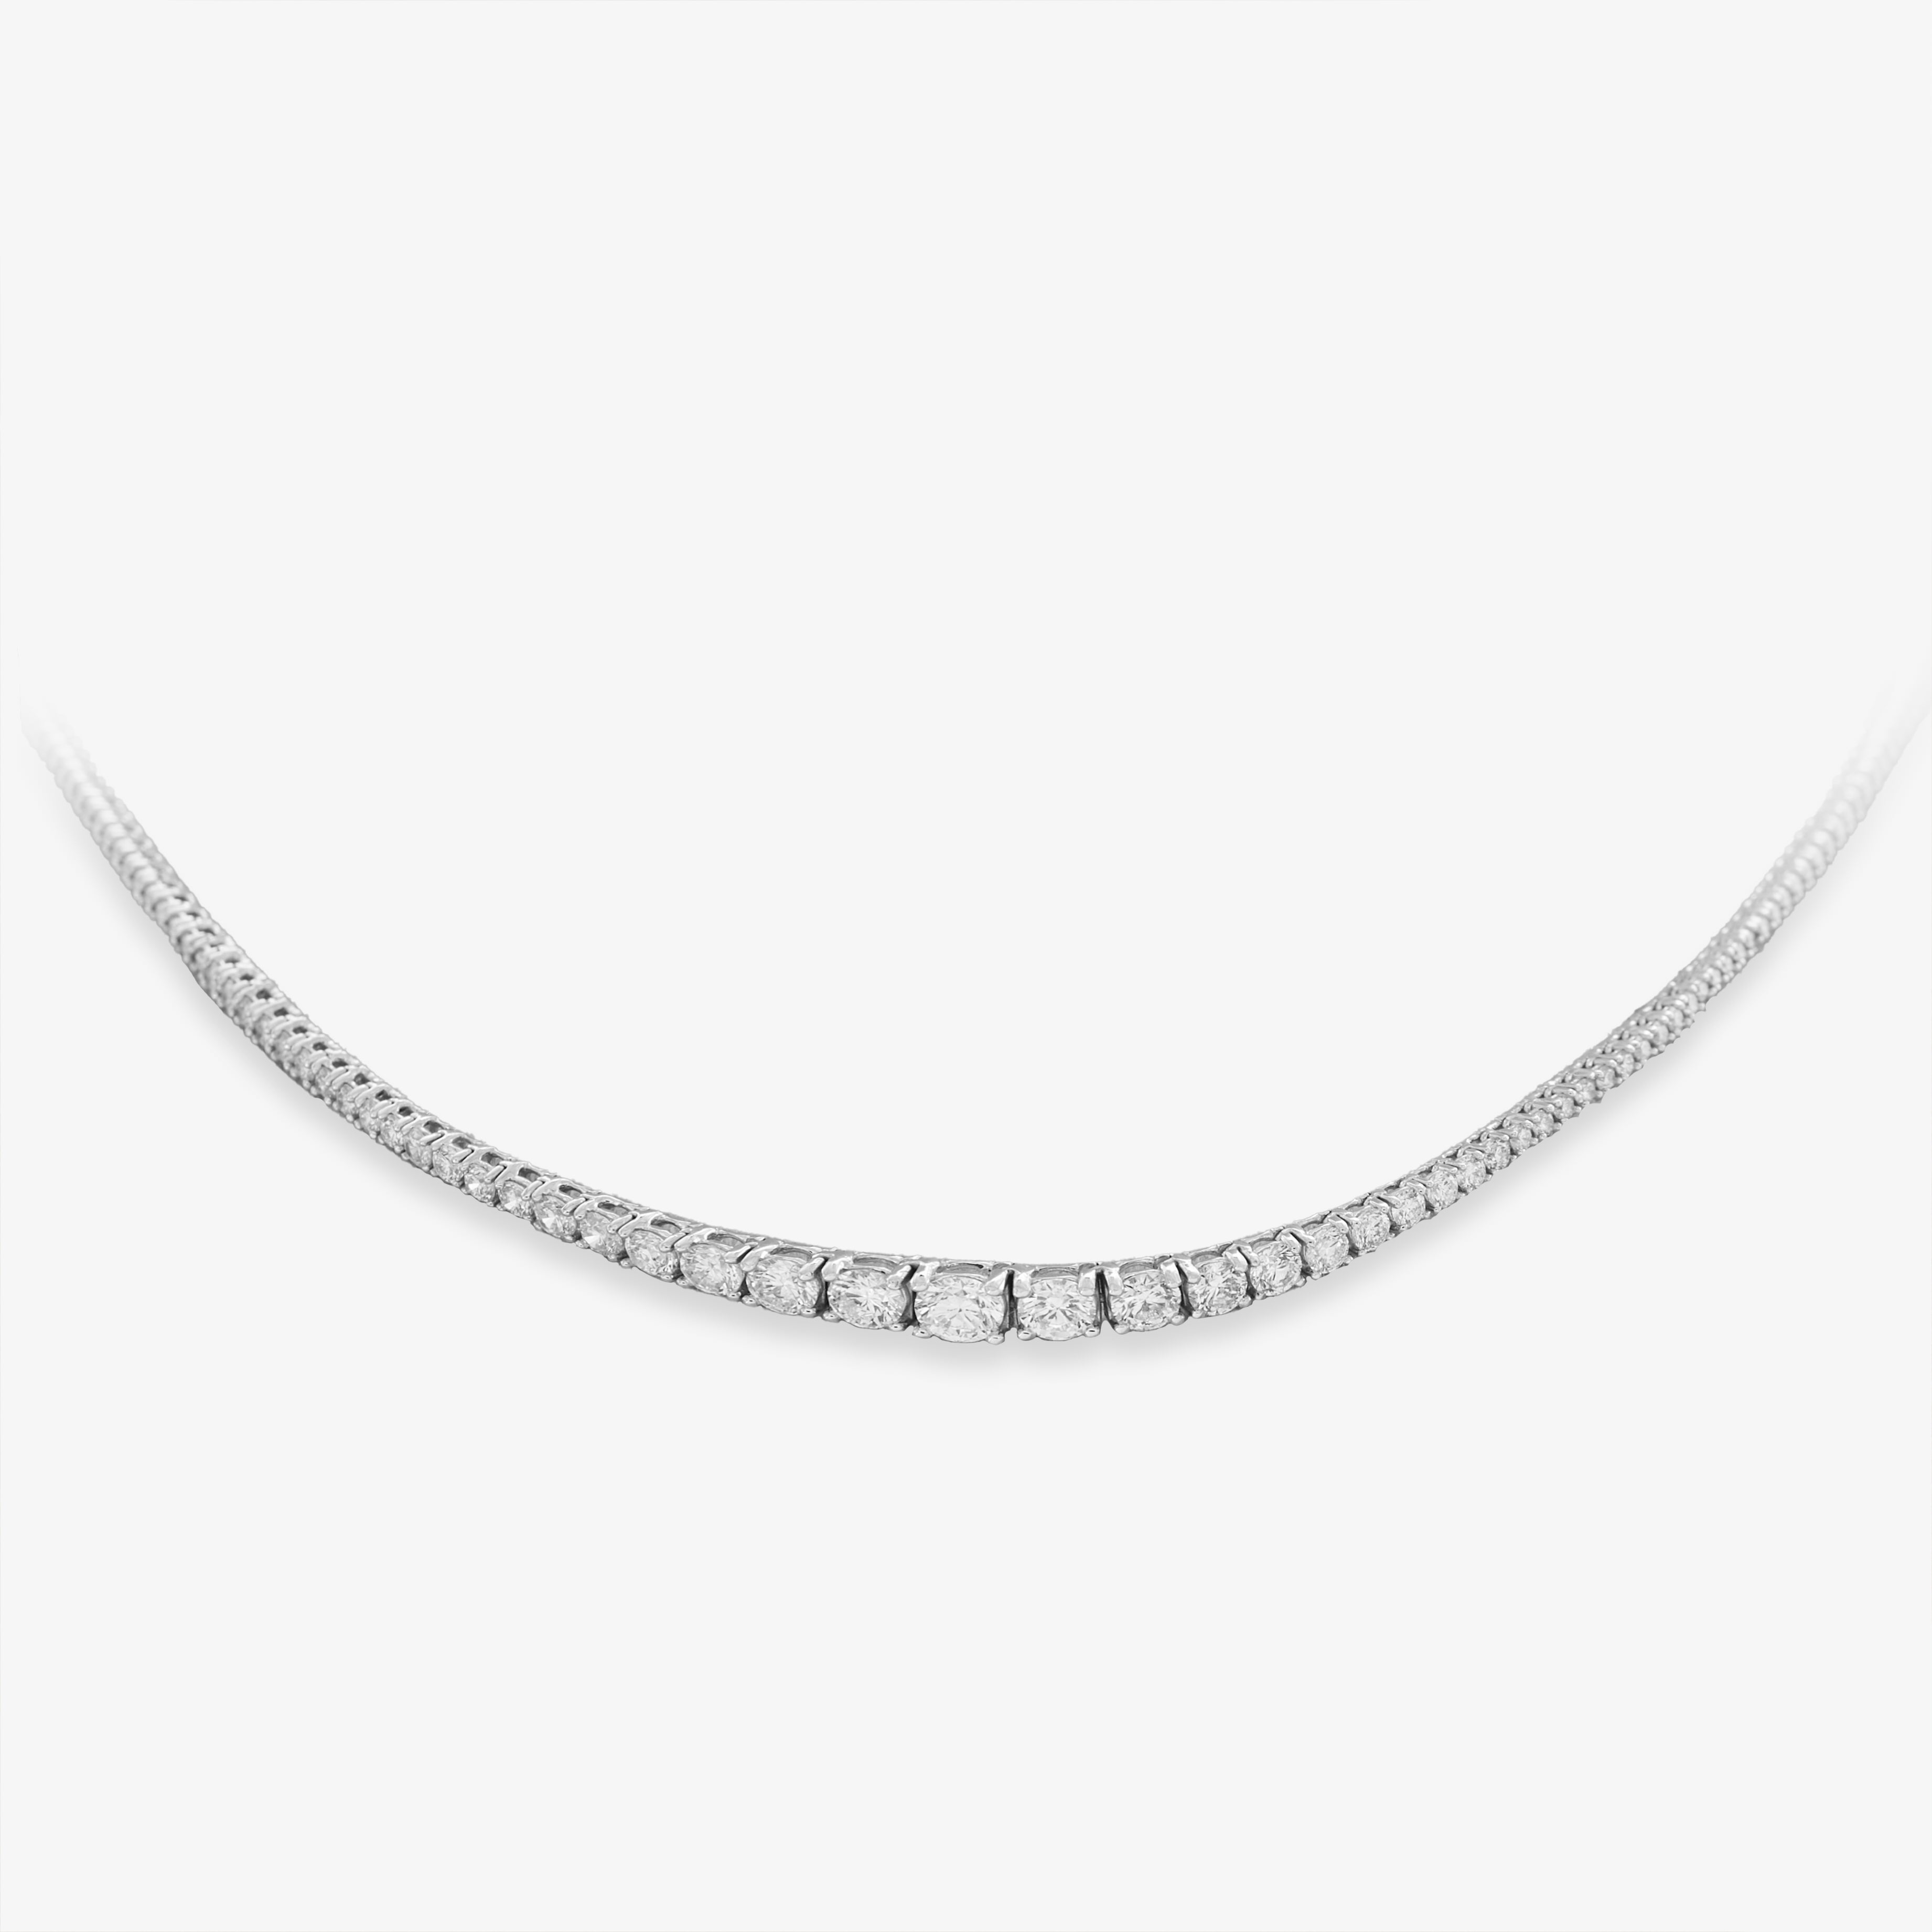 TENNIS NECKLACE WITH DIAMONDS 4.19 CT